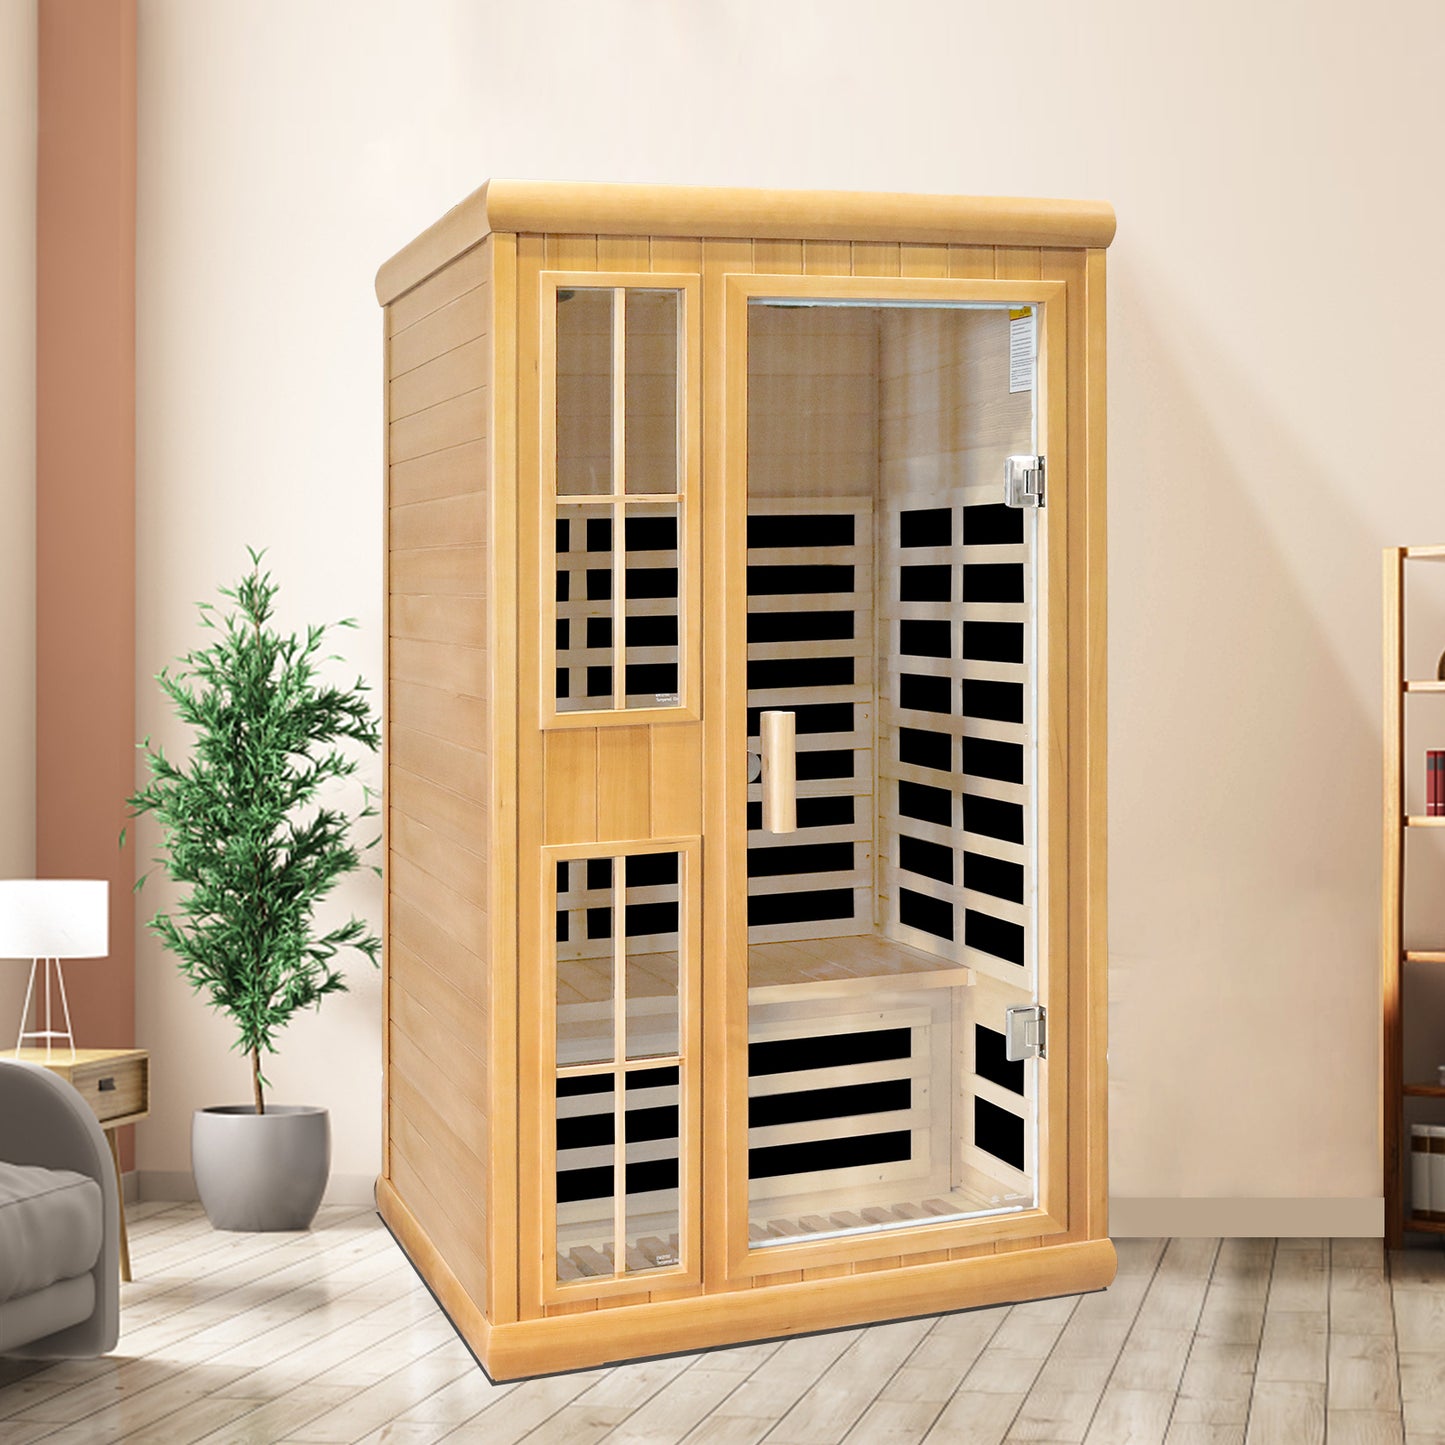 Far infrared sauna double room with Bluetooth audio app control